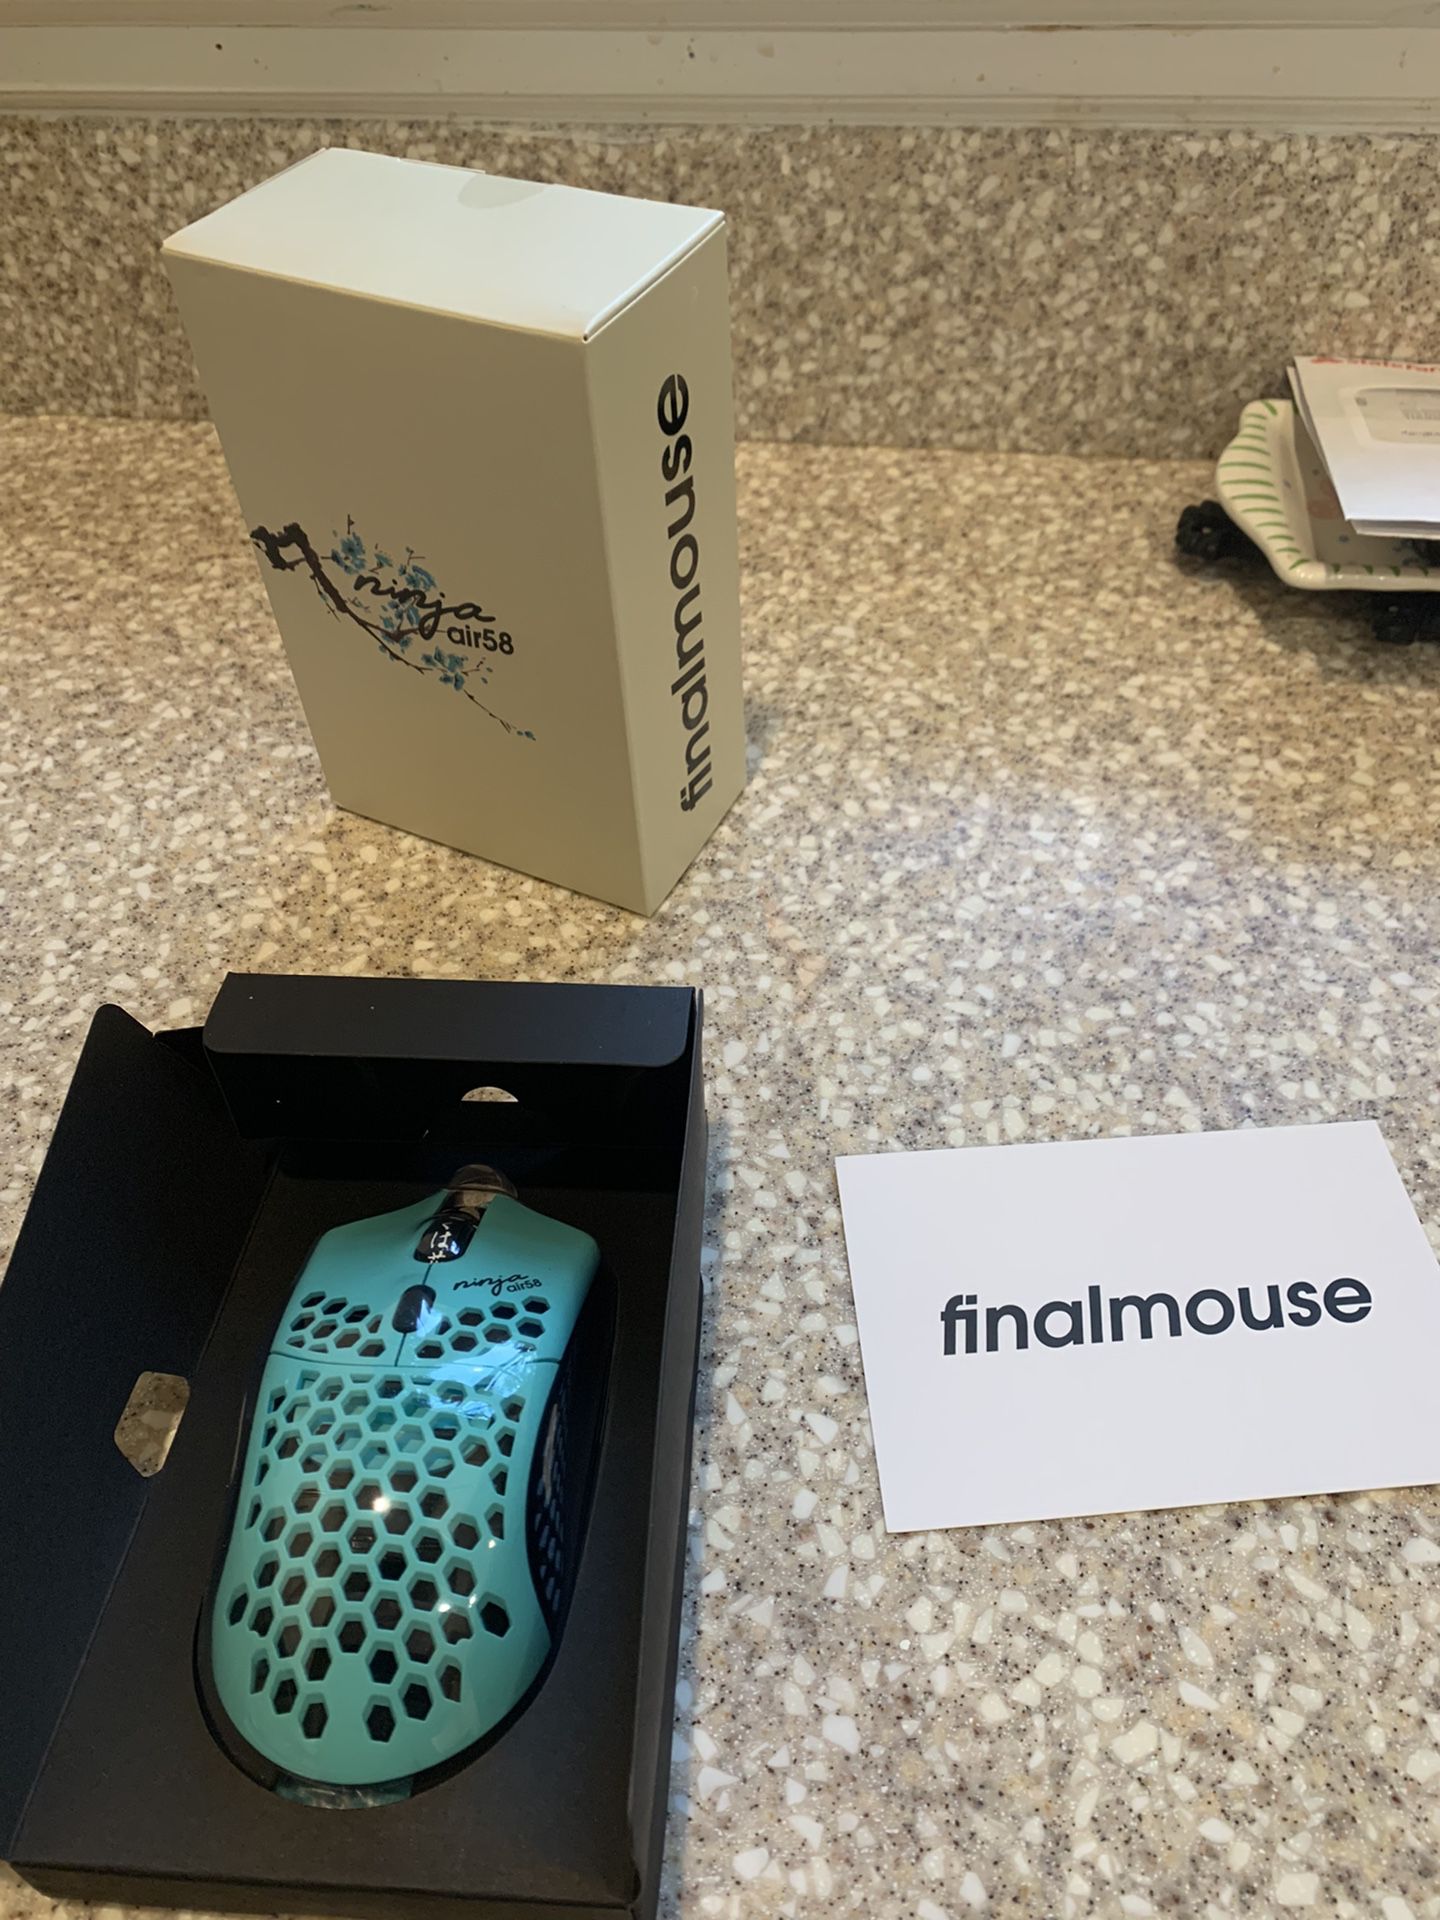 Finalmouse air 58 (NEVER USED)